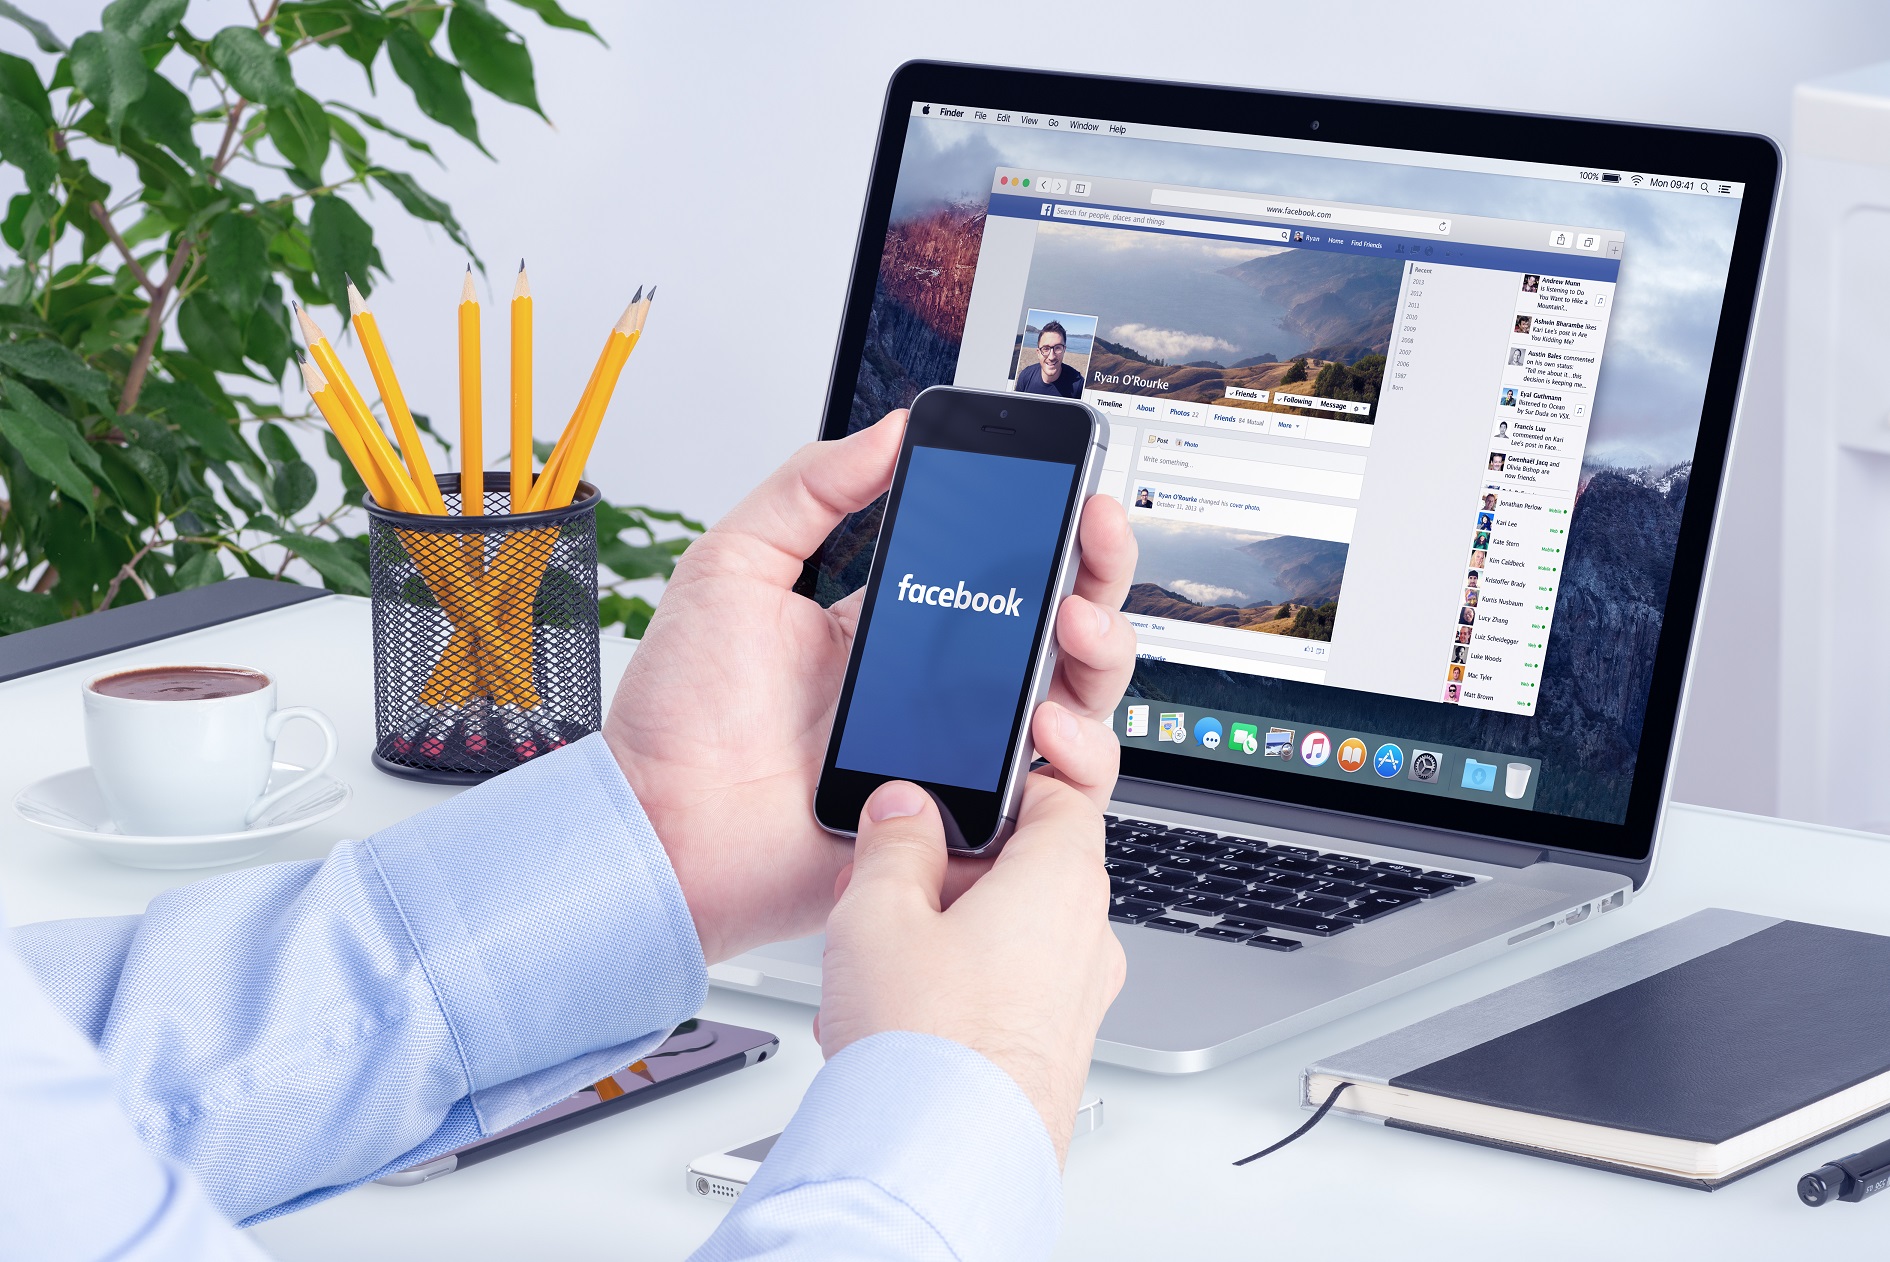 facebook-app-on-the-apple-iphone-display-and-desktop-version-of-facebook-on-the-apple-macbook-pro-retina